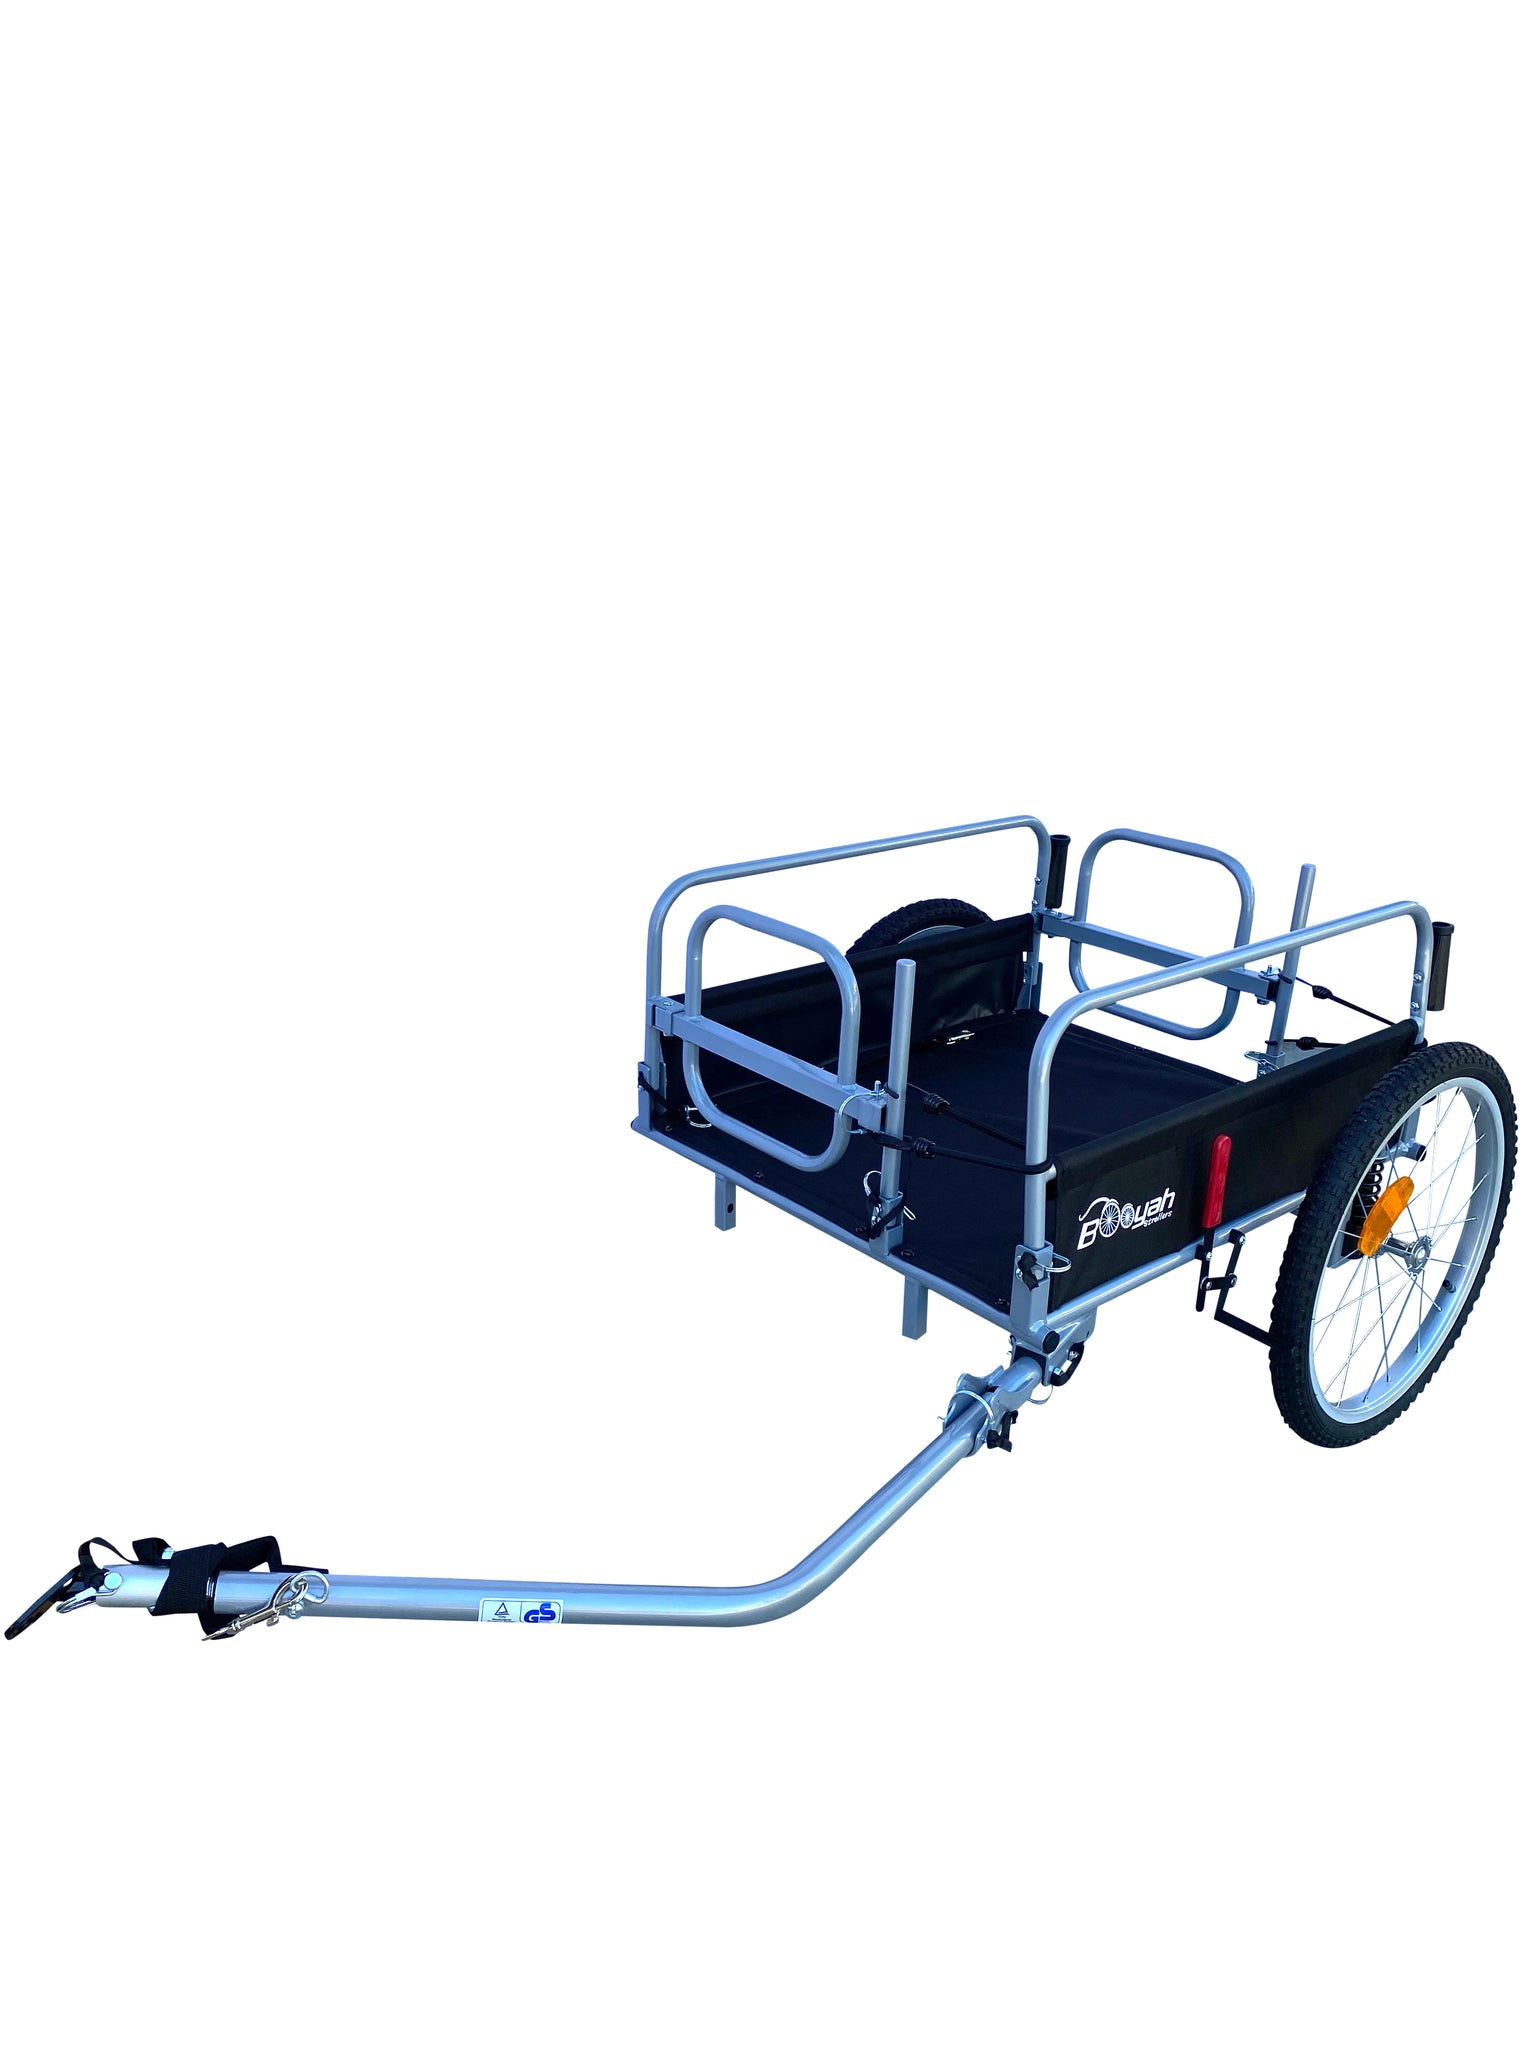 Cargo Beach Cart Stroller and Bike Trailer. Use for Sports Fishing Camping Shopping Food Delivery.